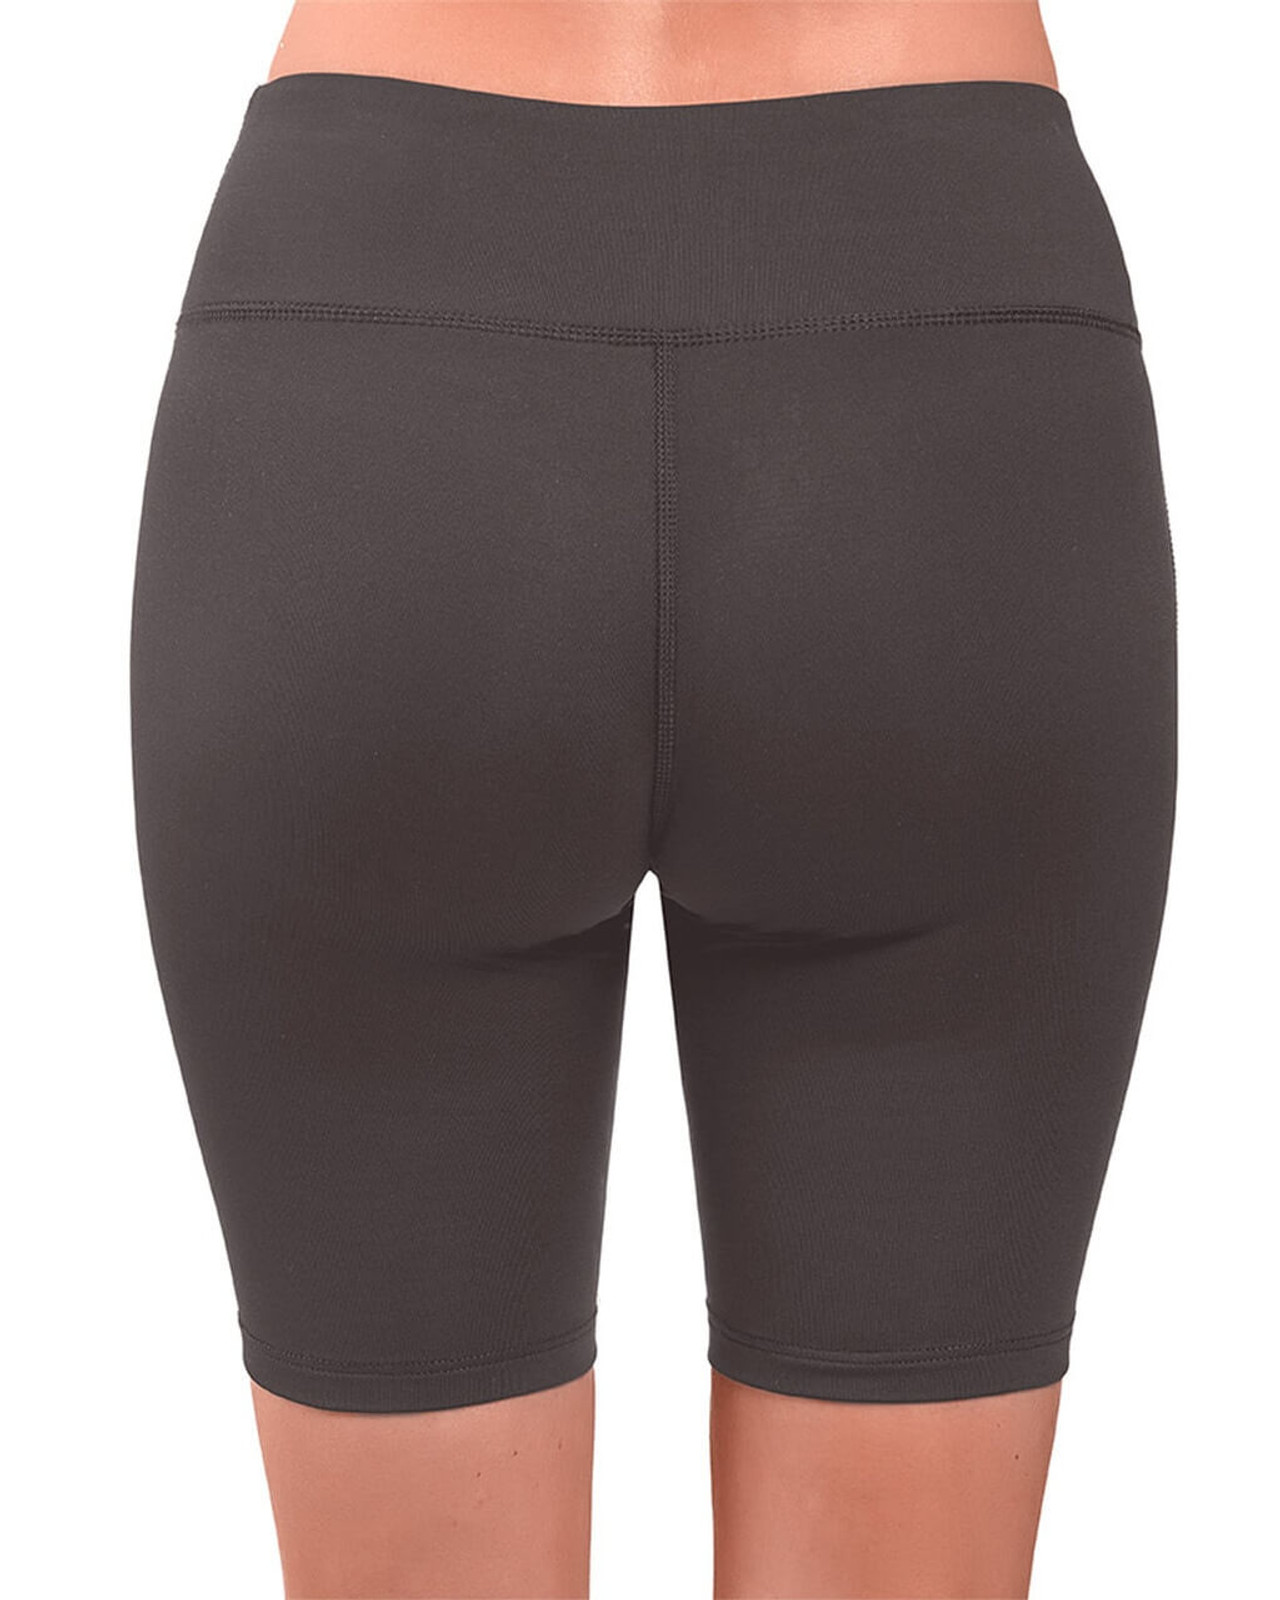 Women’s Compression Running Shorts | Tommie Copper®